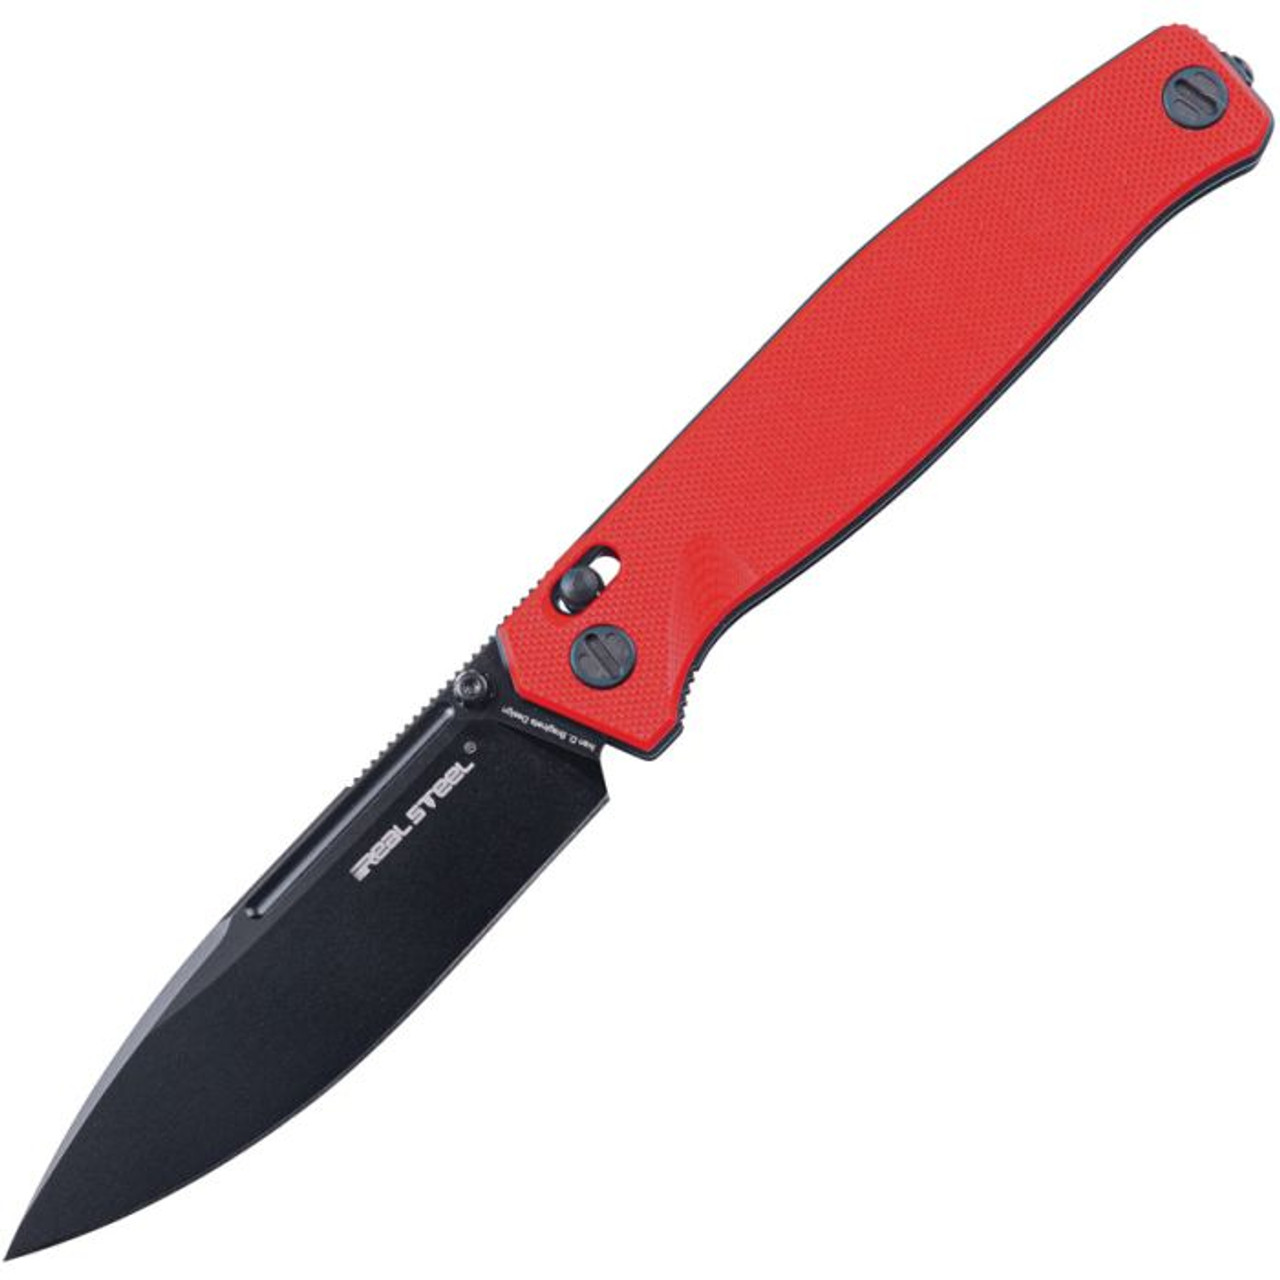 Real Steel Huginn (RS7652RB) 3.63" VG-10 Black Oxide Coated Drop Point Plain Blade, Red and Black G-10 Handle